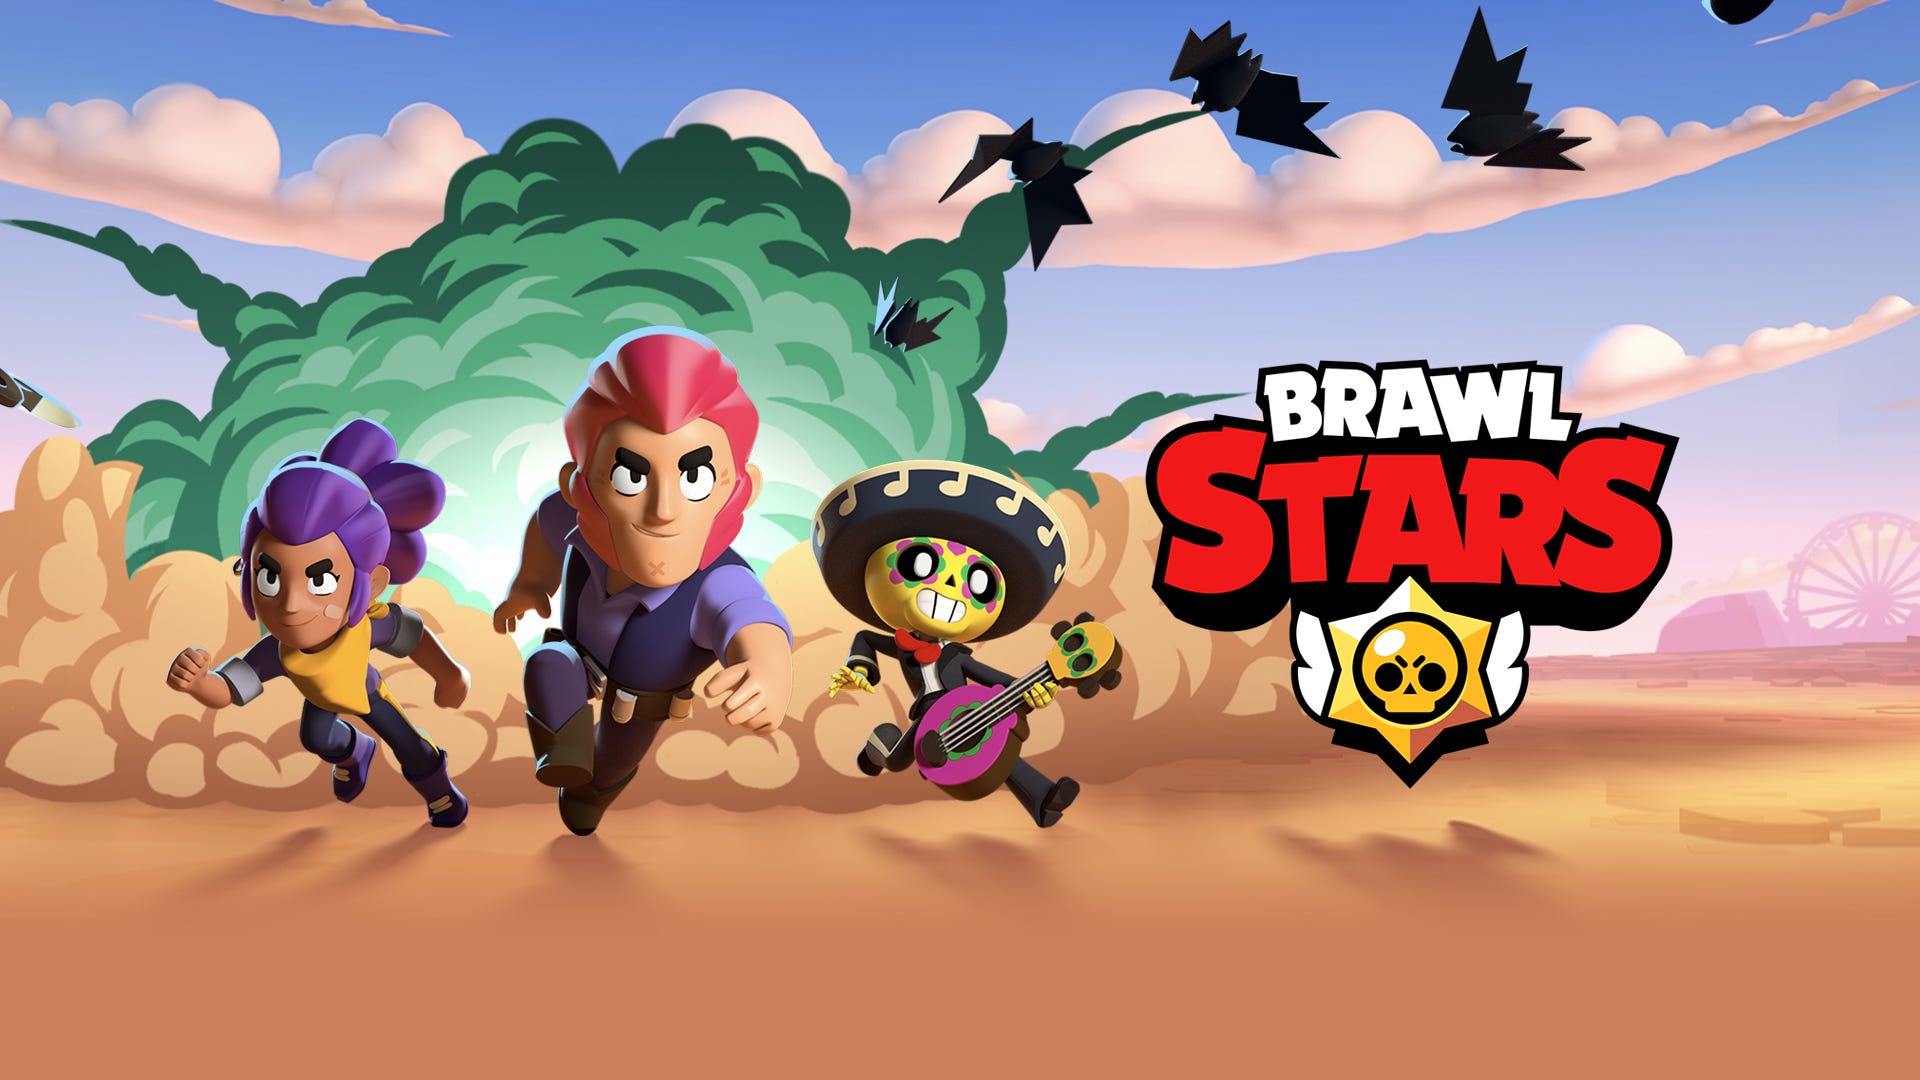 Brawl Stars Is It Balanced Brawl Stars Is A Mobile Game Developed By Siddharth Kapoor Game Design Fundamentals Medium - how does brawl stars boss fight work